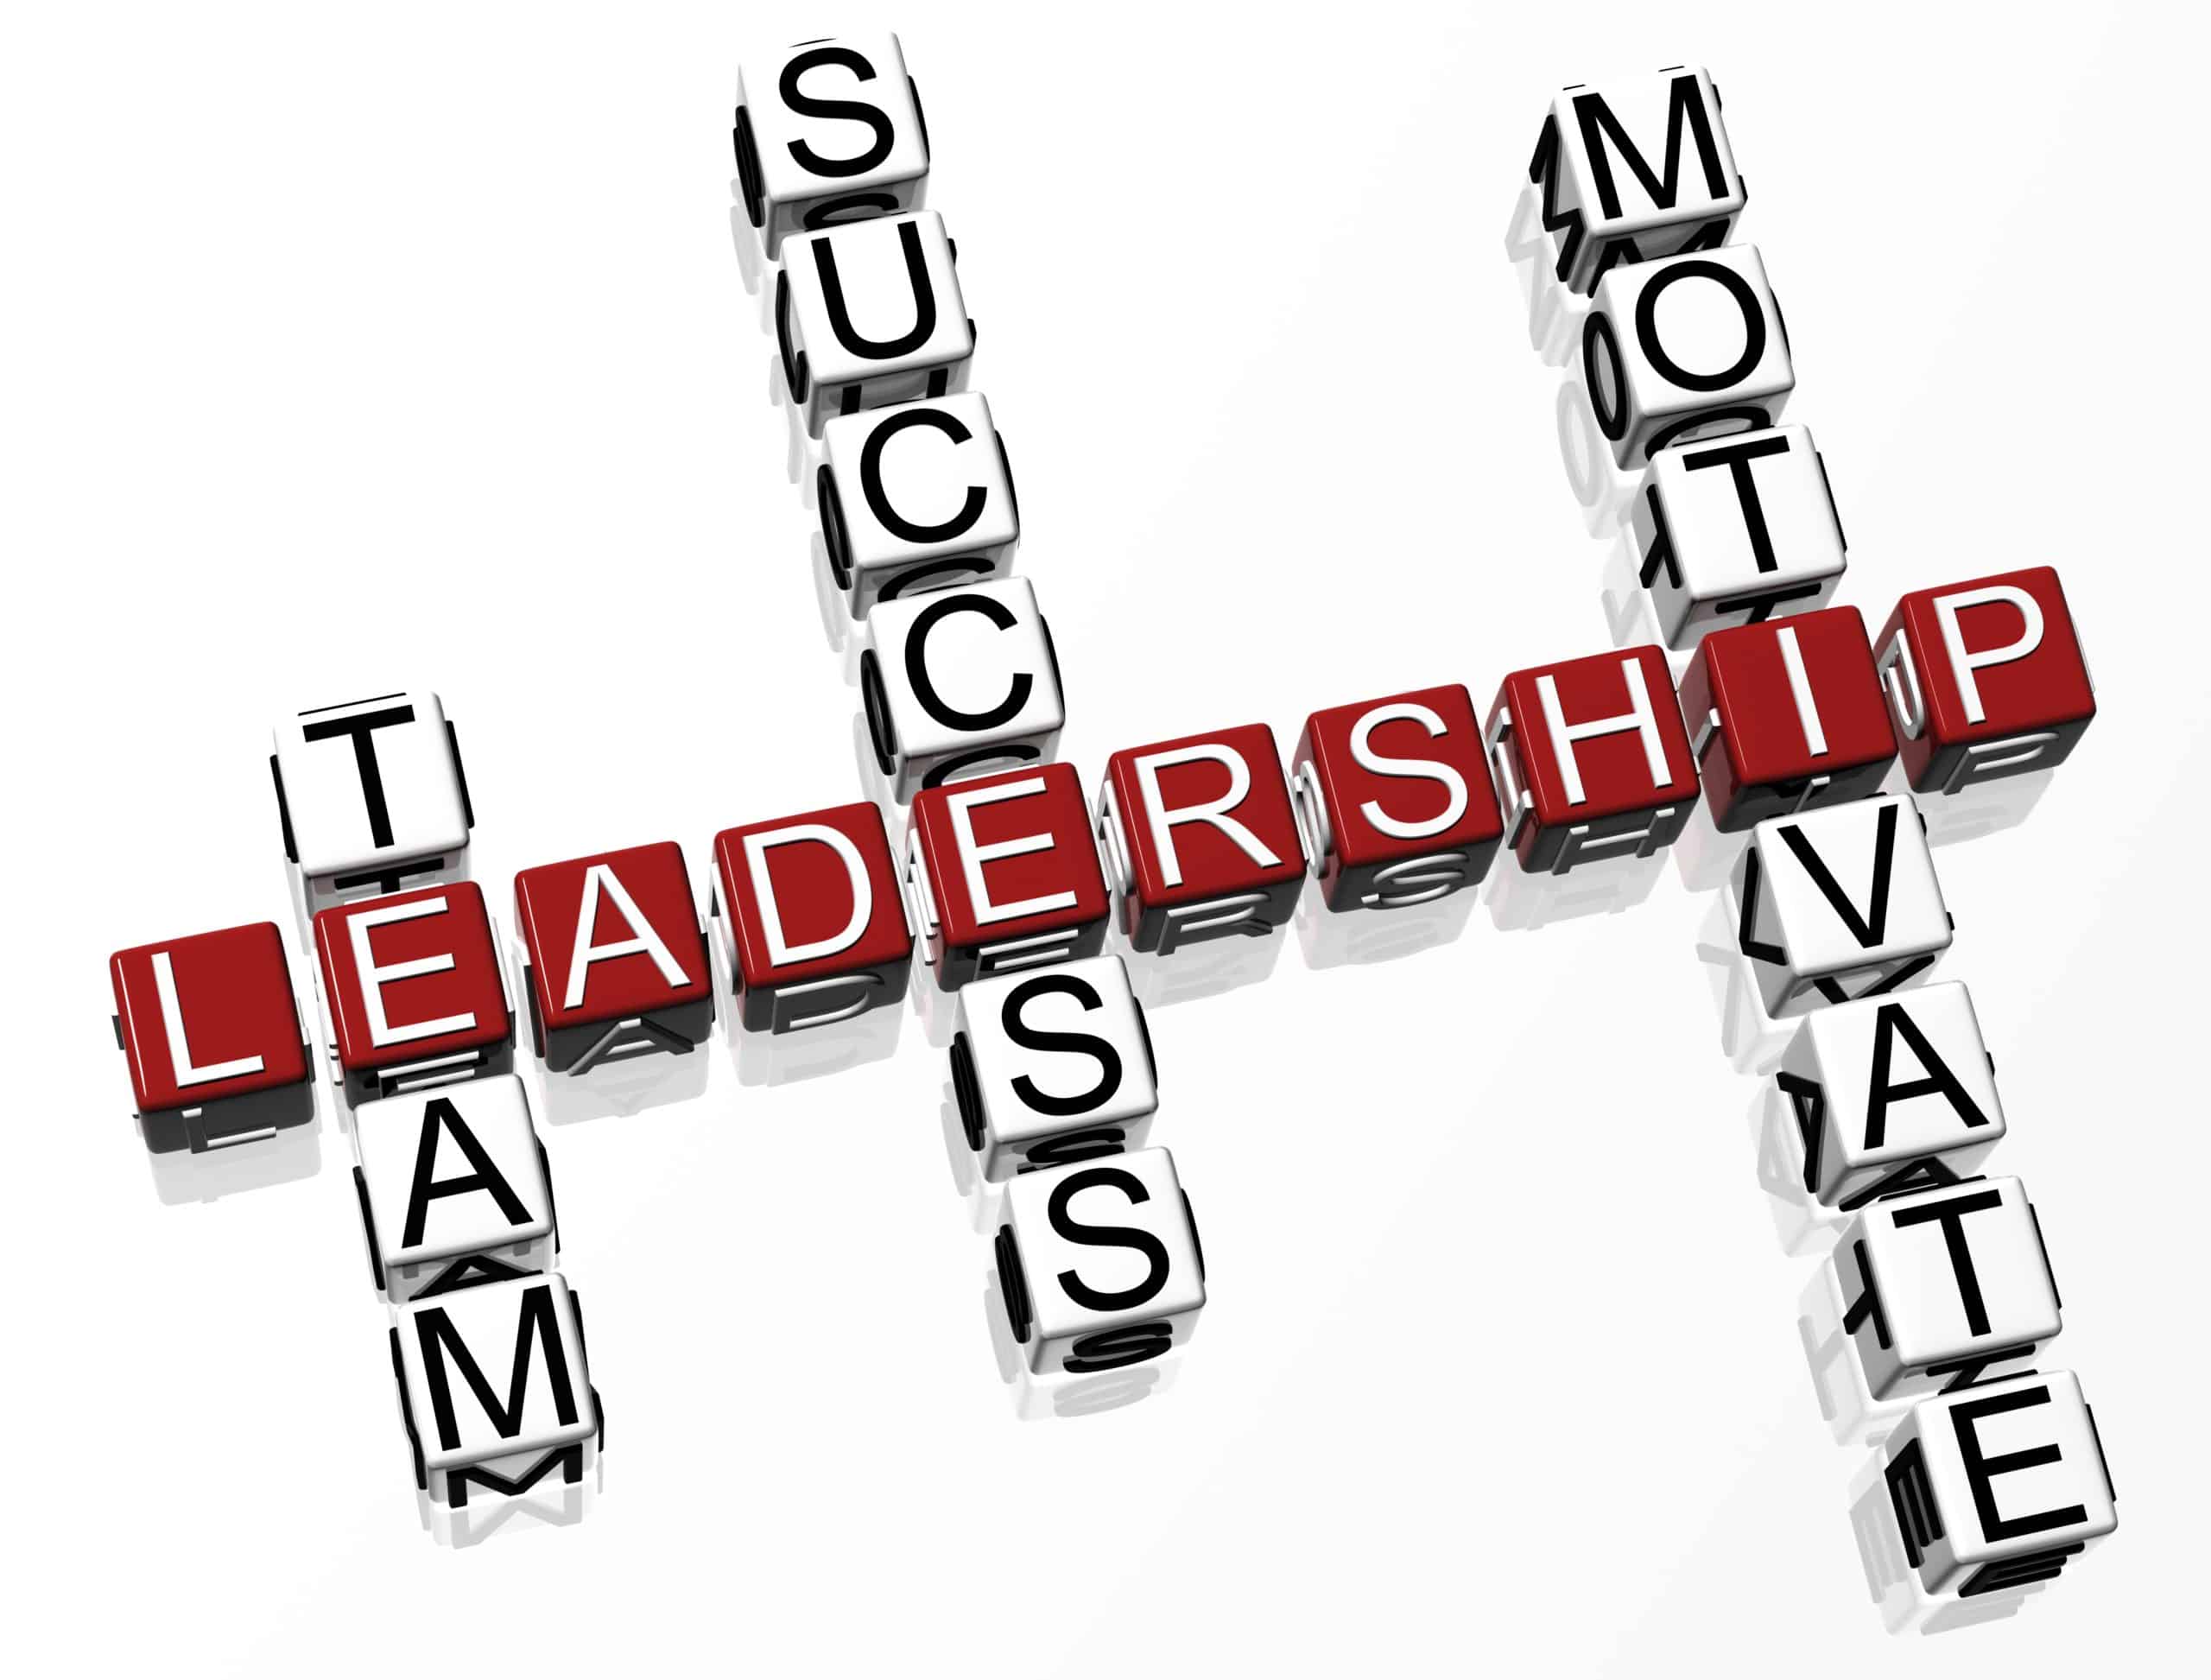 What Can You Learn From The Leadership Development Series?